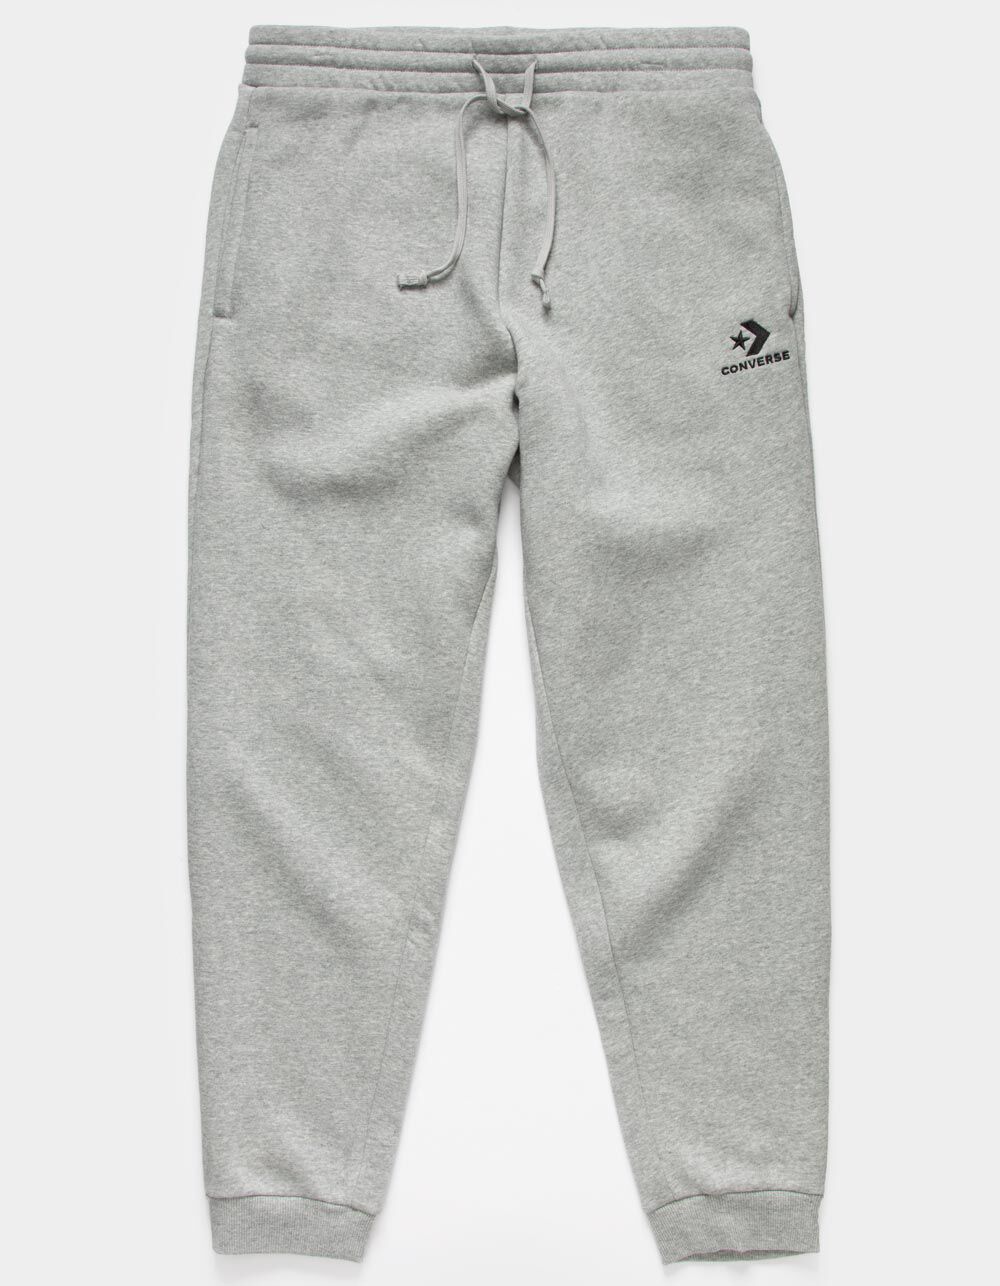 CONVERSE Embroidered Star Mens Sweatpants - HEATHER GRAY | Tillys